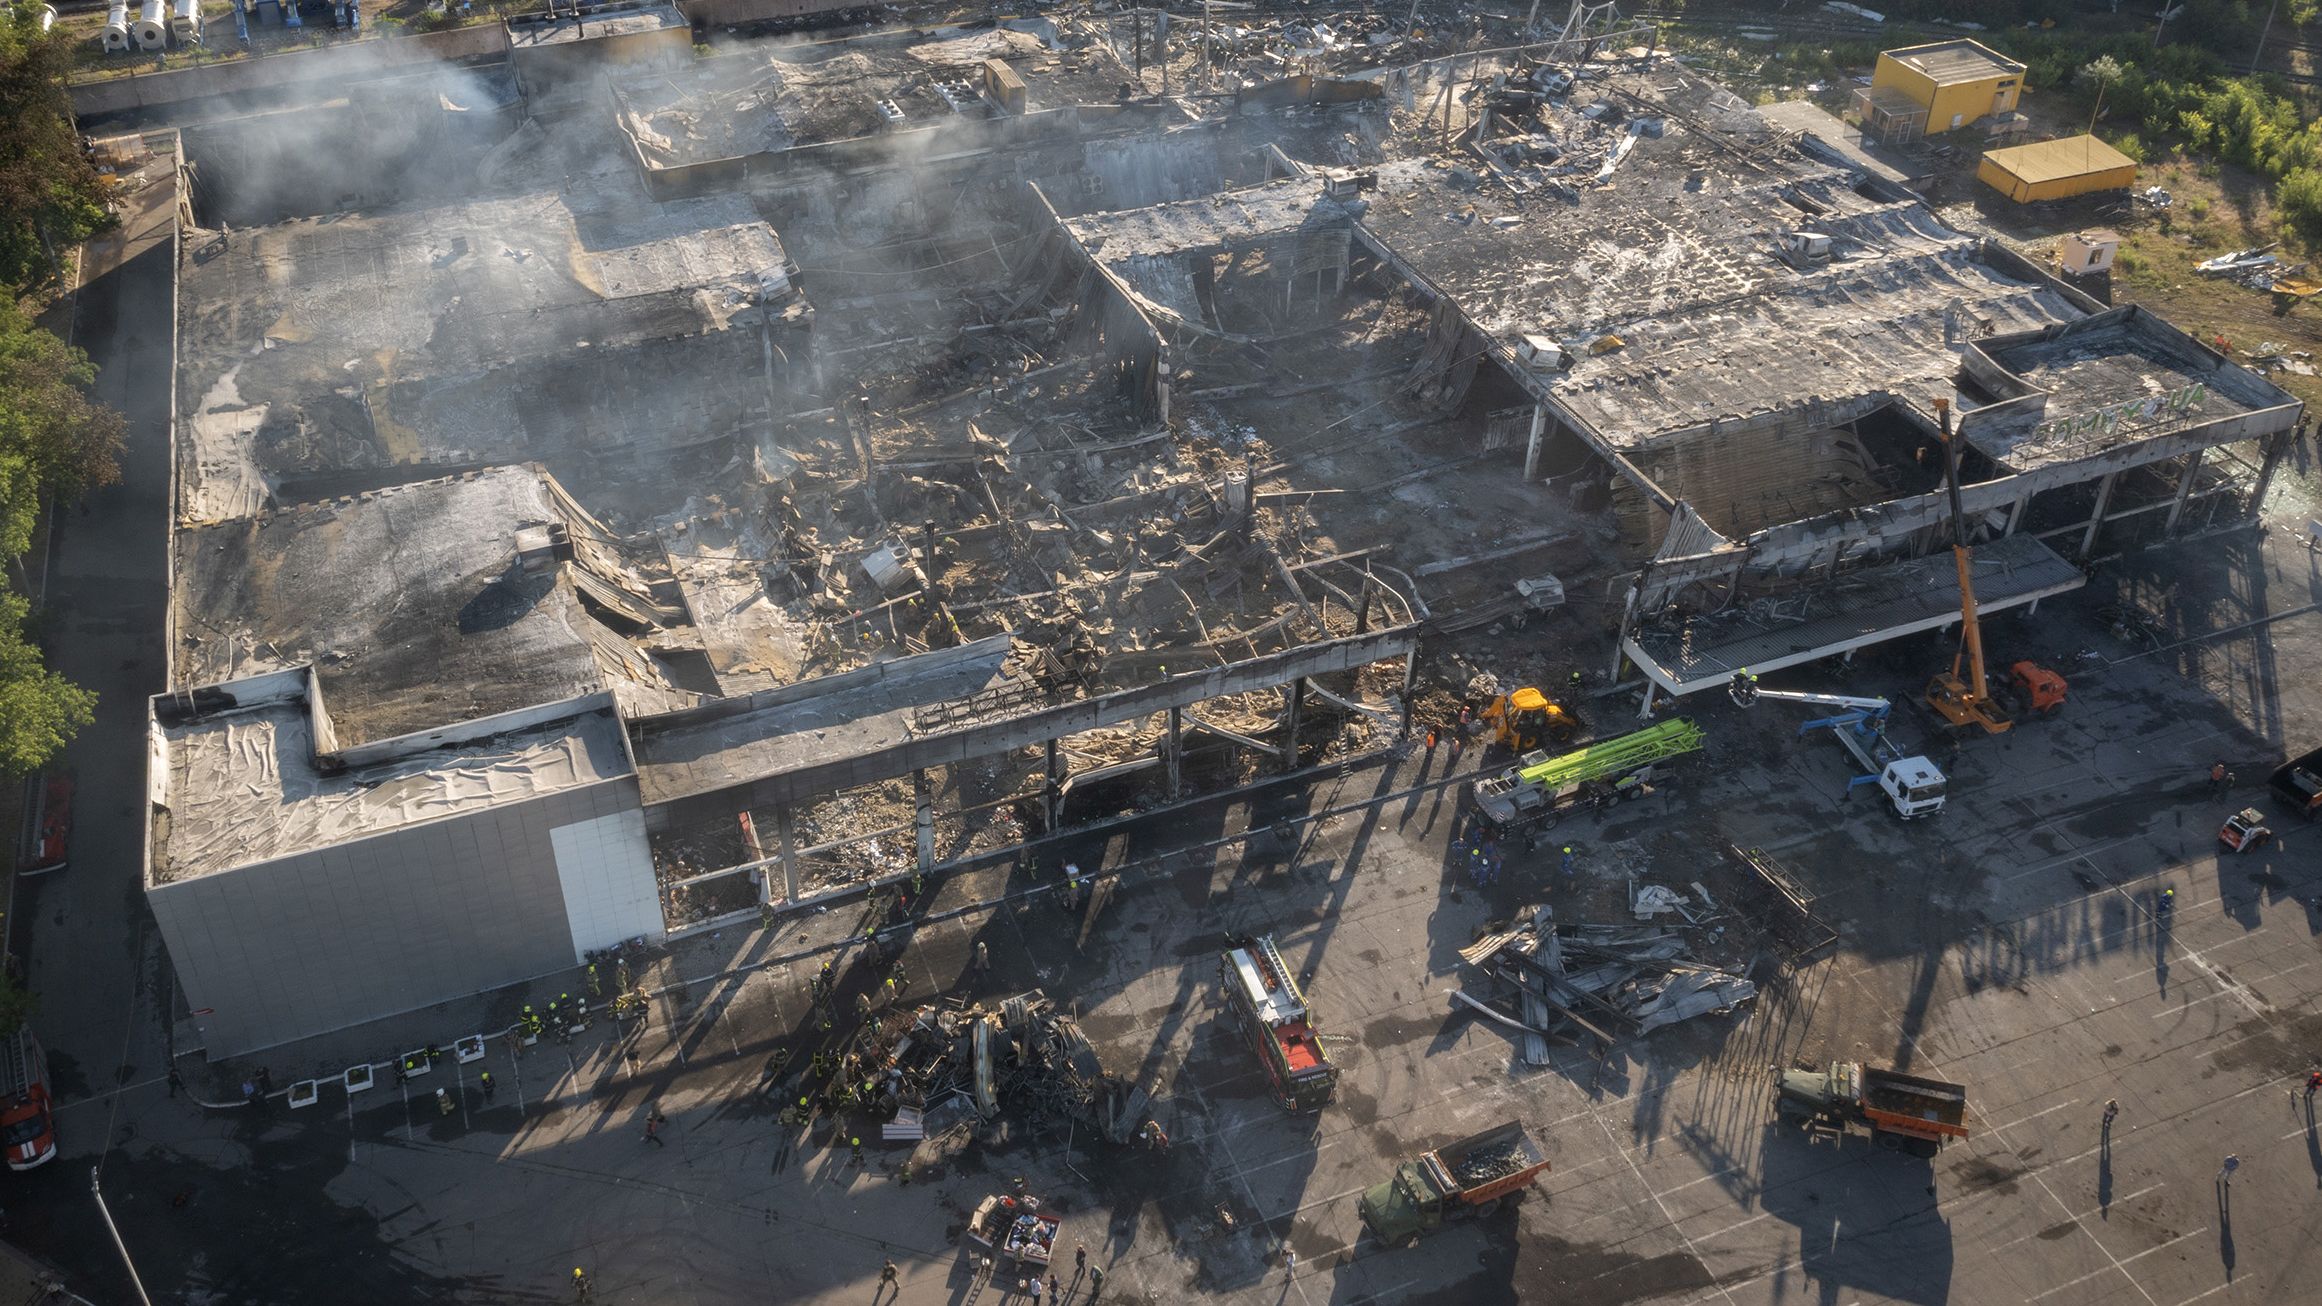 Ukrainian State Emergency Service firefighters work to take away debris at a shopping mall after a <a href="https://edition.cnn.com/europe/live-news/russia-ukraine-war-news-06-28-22/h_f2e4cf15367437c654d2db5ed8fa9349" target="_blank">rocket attack in Kremenchuk</a>, Ukraine, on June 28.